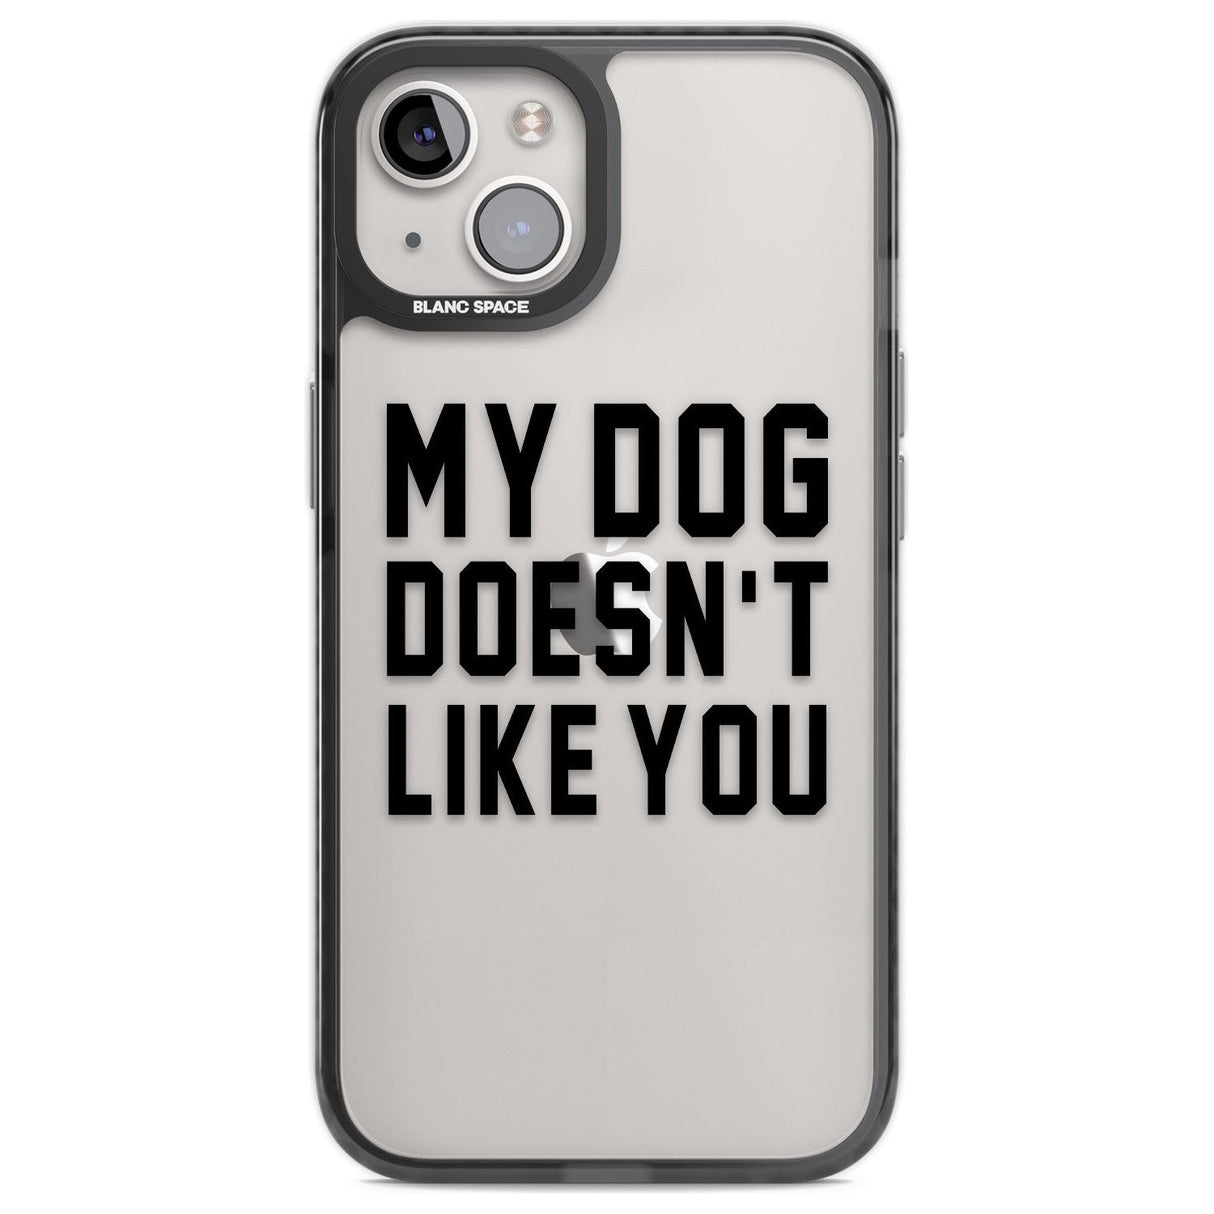 Dog Doesn't Like You Phone Case iPhone 12 / Black Impact Case,iPhone 13 / Black Impact Case,iPhone 12 Pro / Black Impact Case,iPhone 14 / Black Impact Case,iPhone 15 Plus / Black Impact Case,iPhone 15 / Black Impact Case Blanc Space